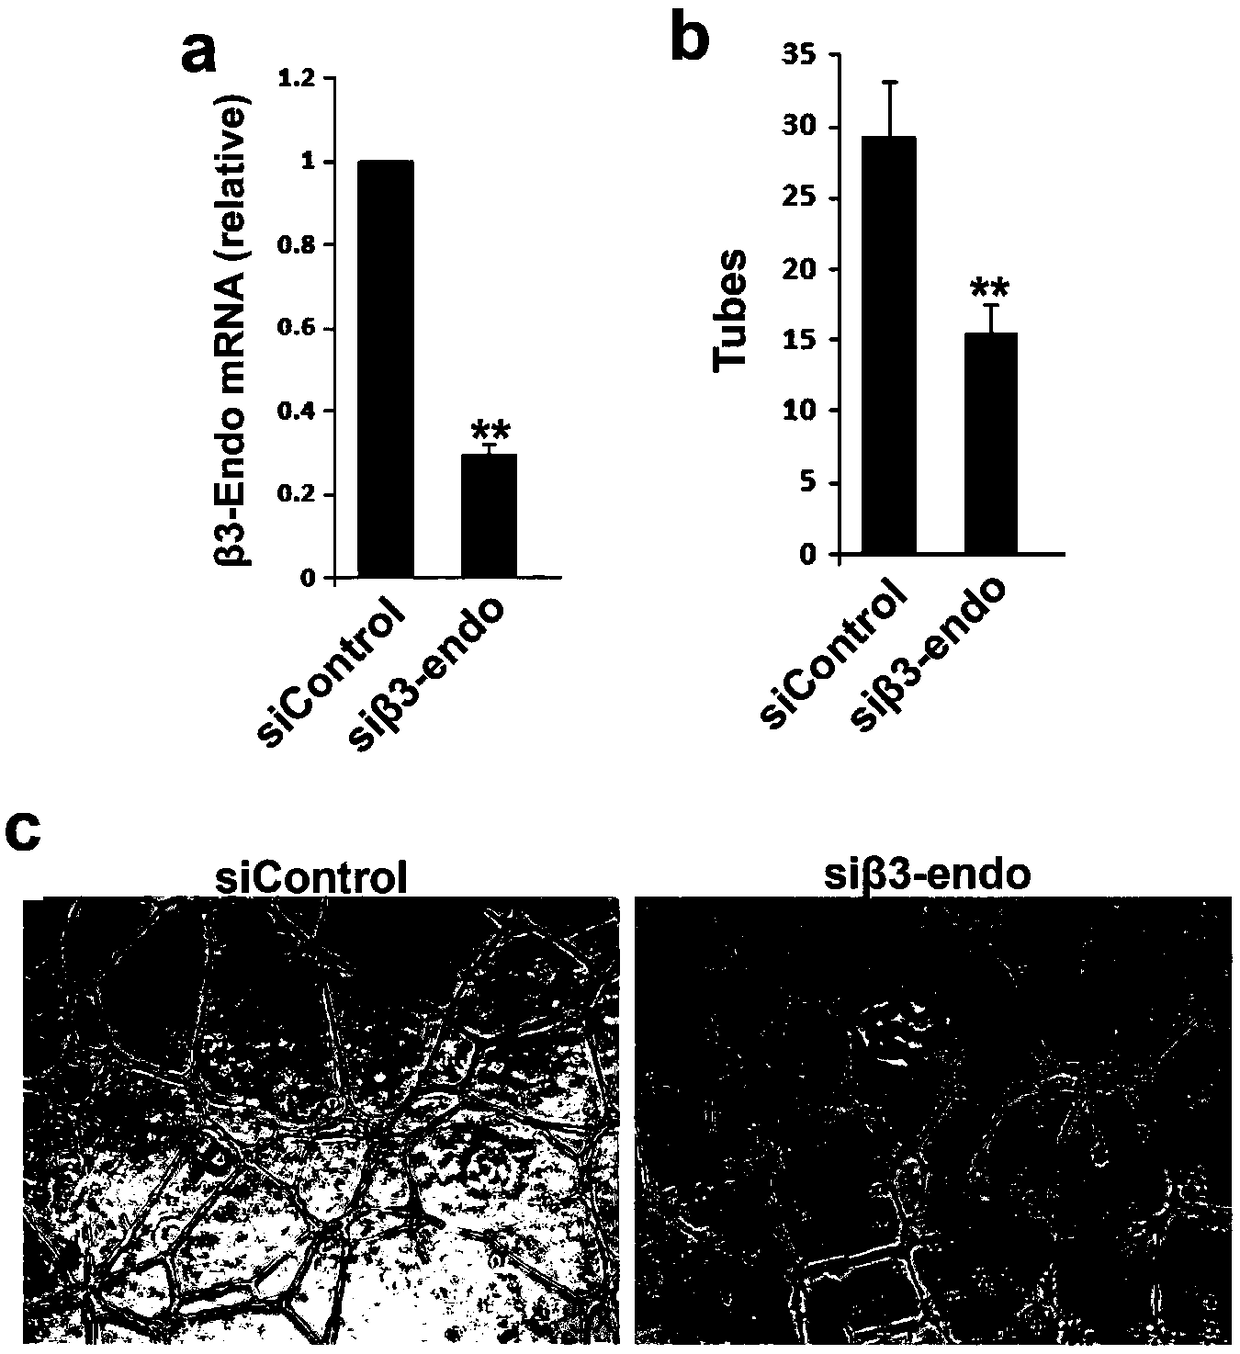 Application of beta 3-endoxine protein factor as target molecule in regulation of neovascularization